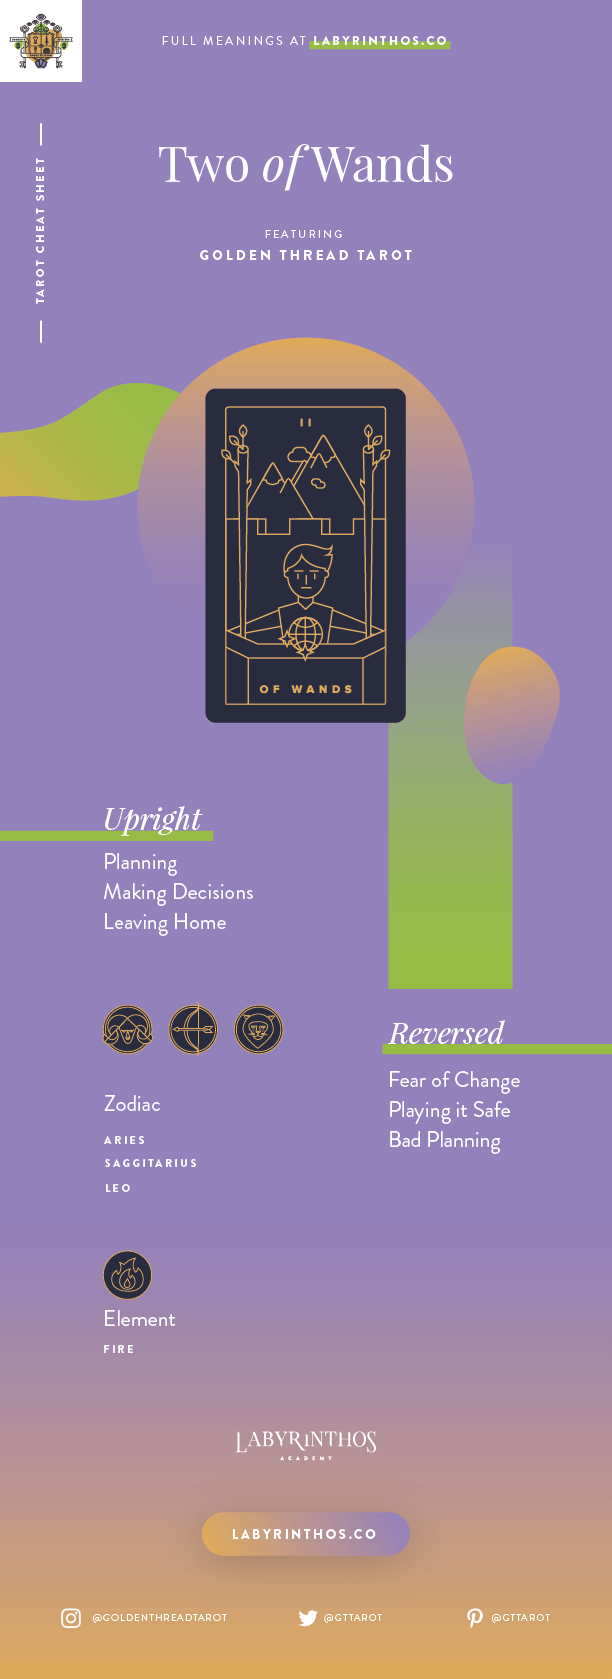 Two of Wands Meaning - Tarot Card Meanings Cheat Sheet